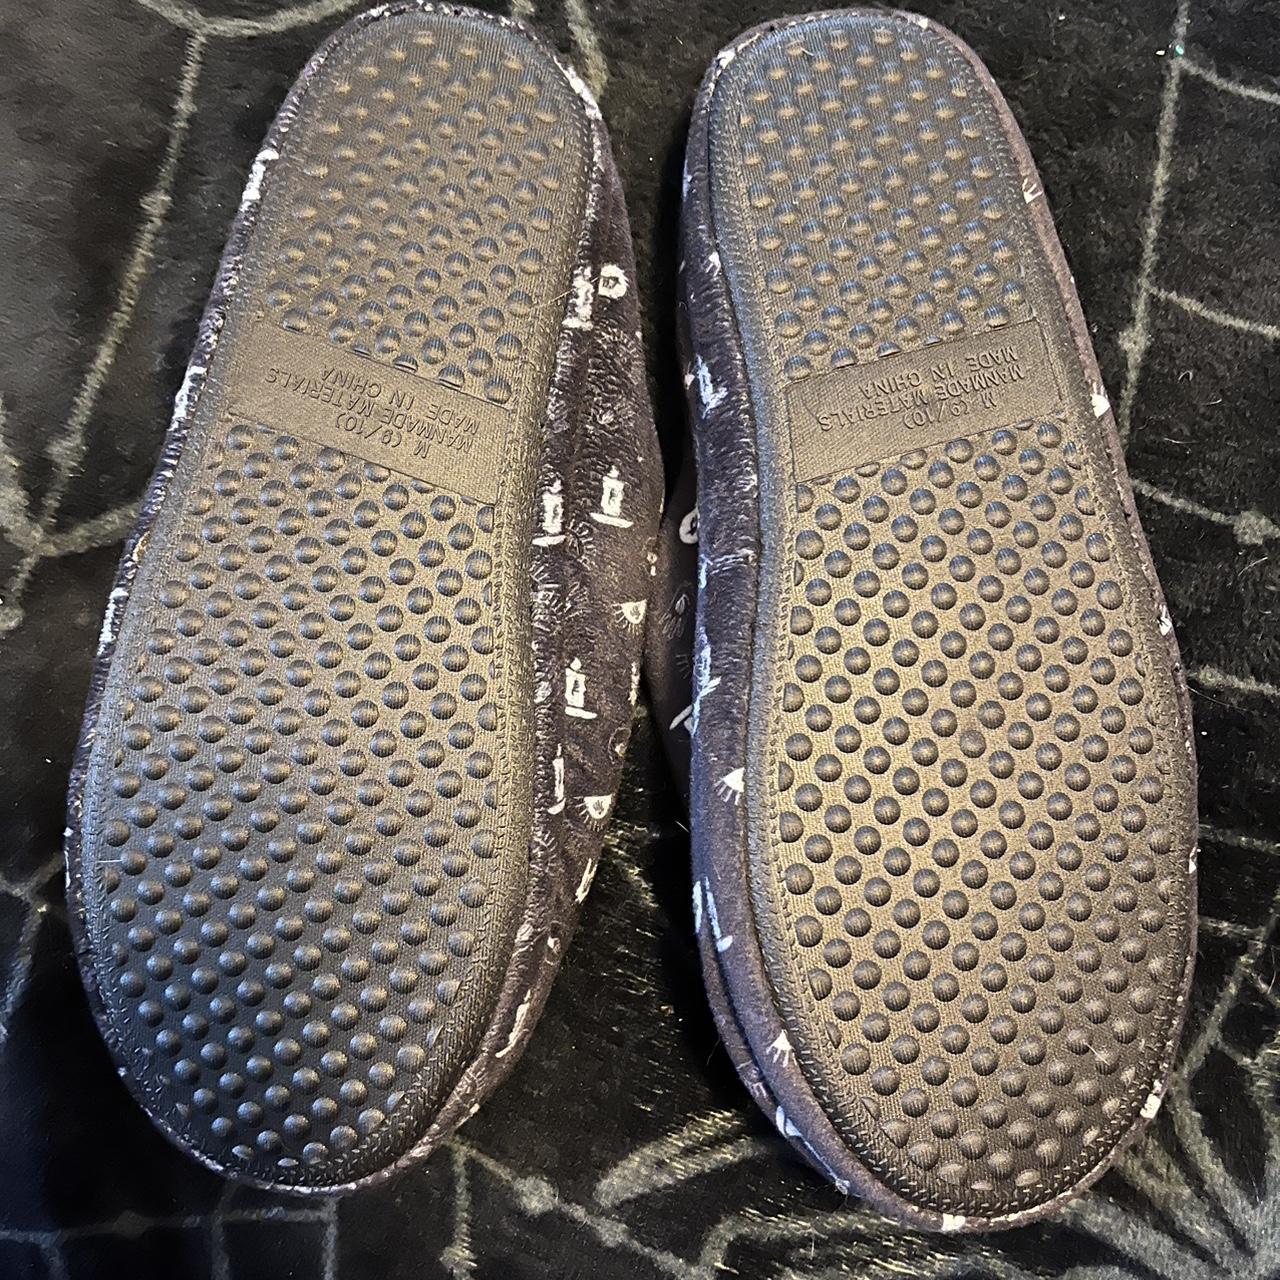 Hot Topic Women's Black and Grey Slippers (5)